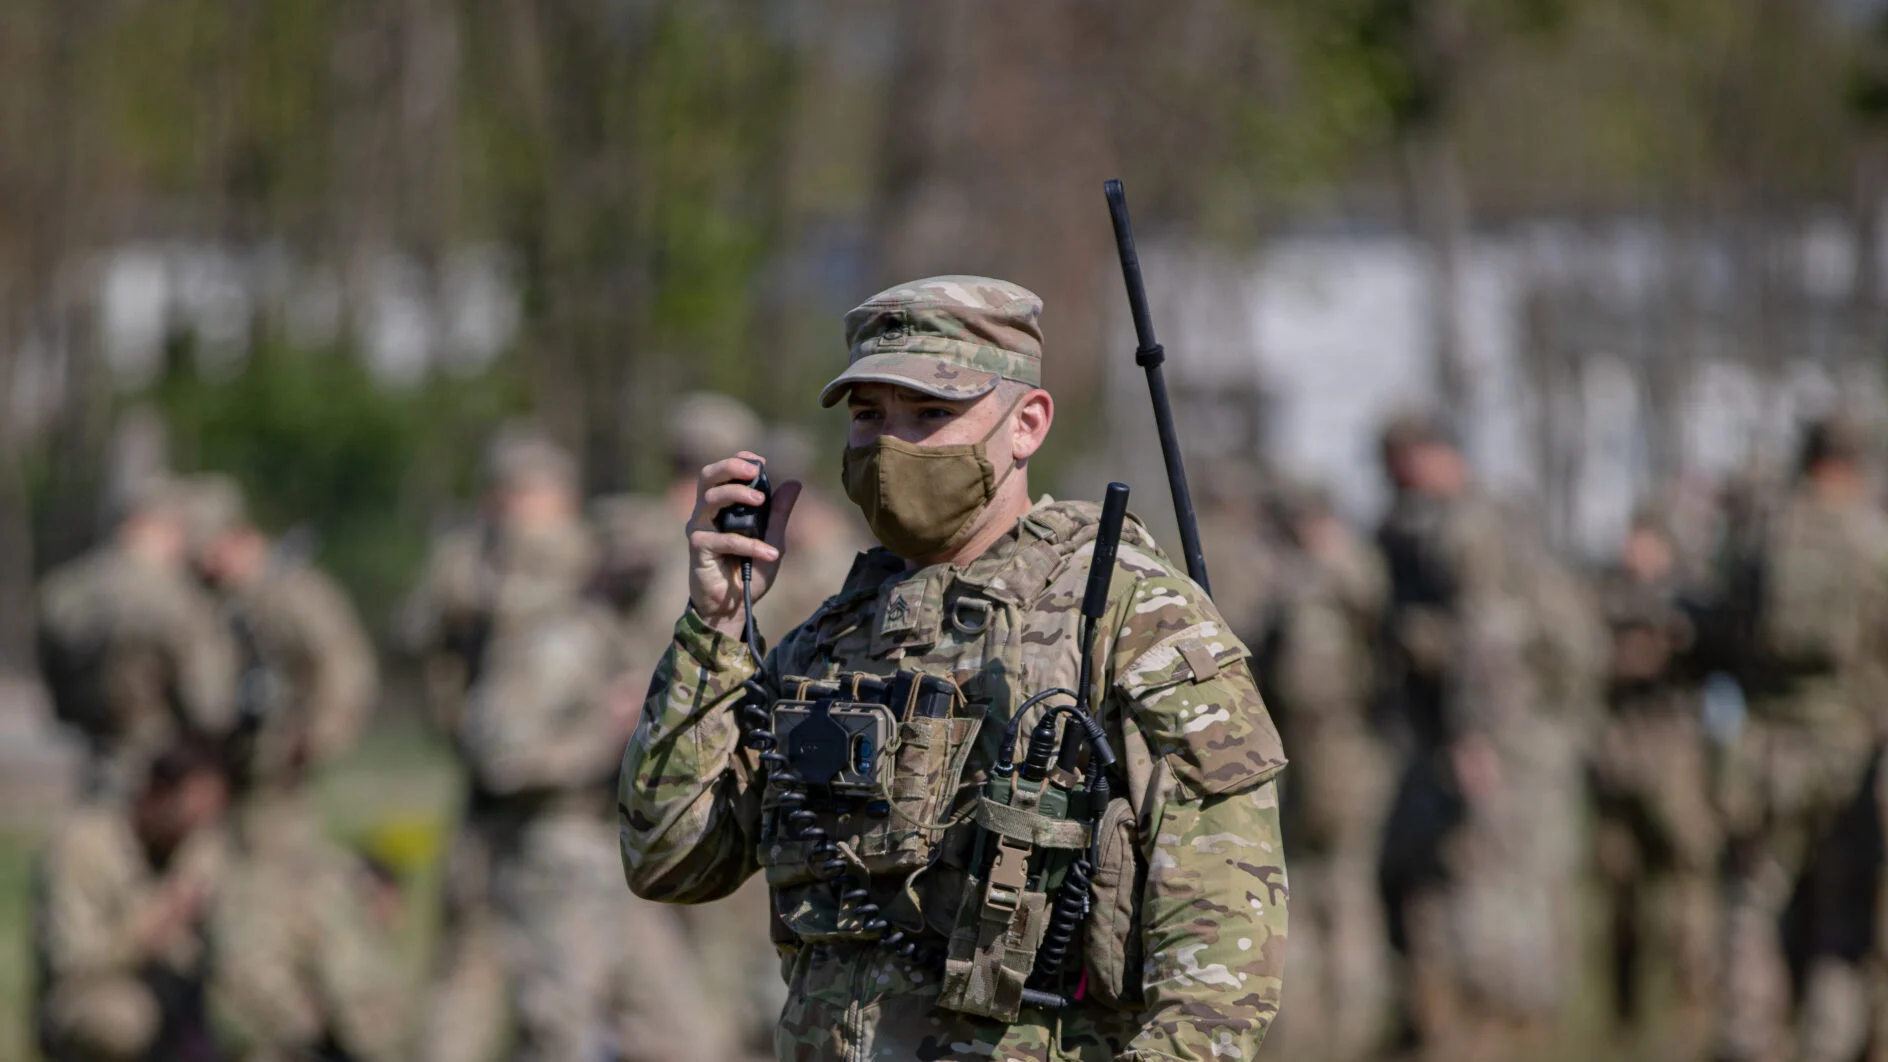 A U.S. Army paratrooper assigned to the 173rd Airborne Brigade tests his PRC-163 radio to ensure that communications are ready before conducting an airborne assault into Bulgaria during exercise Swift Response 21 in Papa Air Base, Hungary, May 8, 2021